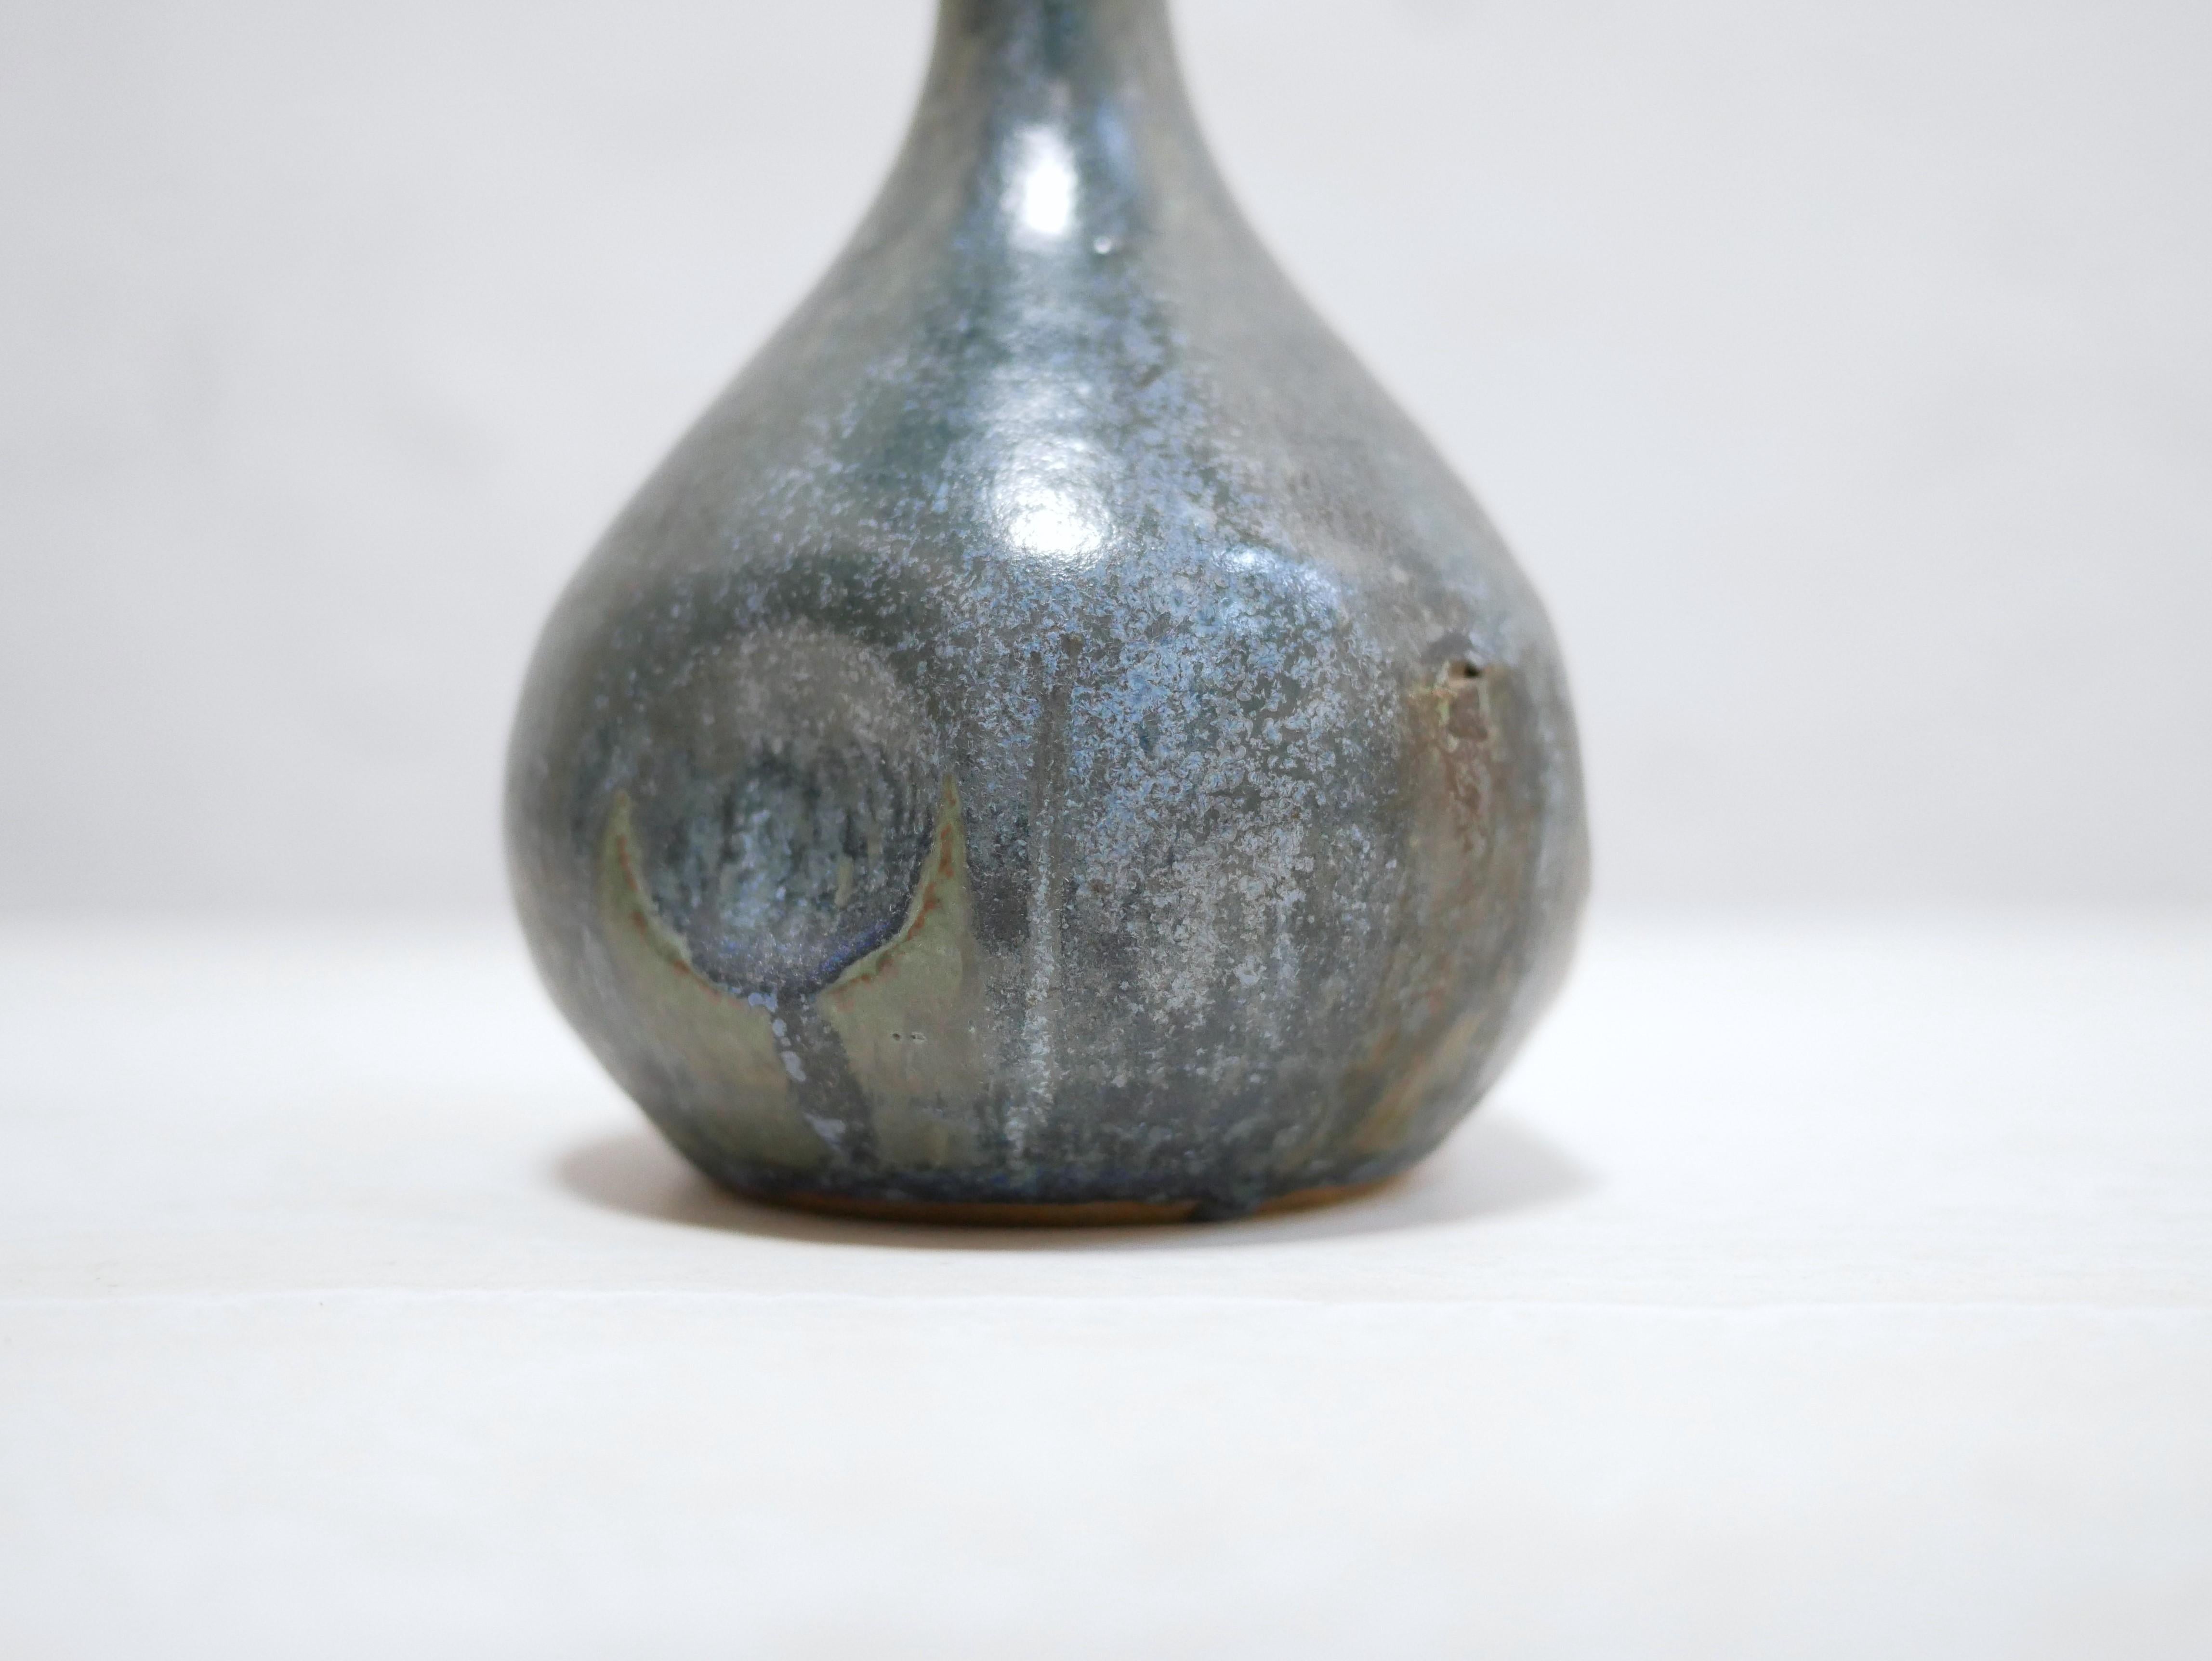 Stoneware soliflore vase dating from the 1960s.

With its modern shape and pretty color, this ceramic will be perfect in a current decoration.
We simply imagine it placed on a shelf or a piece of furniture, in the living room, entrance or dining